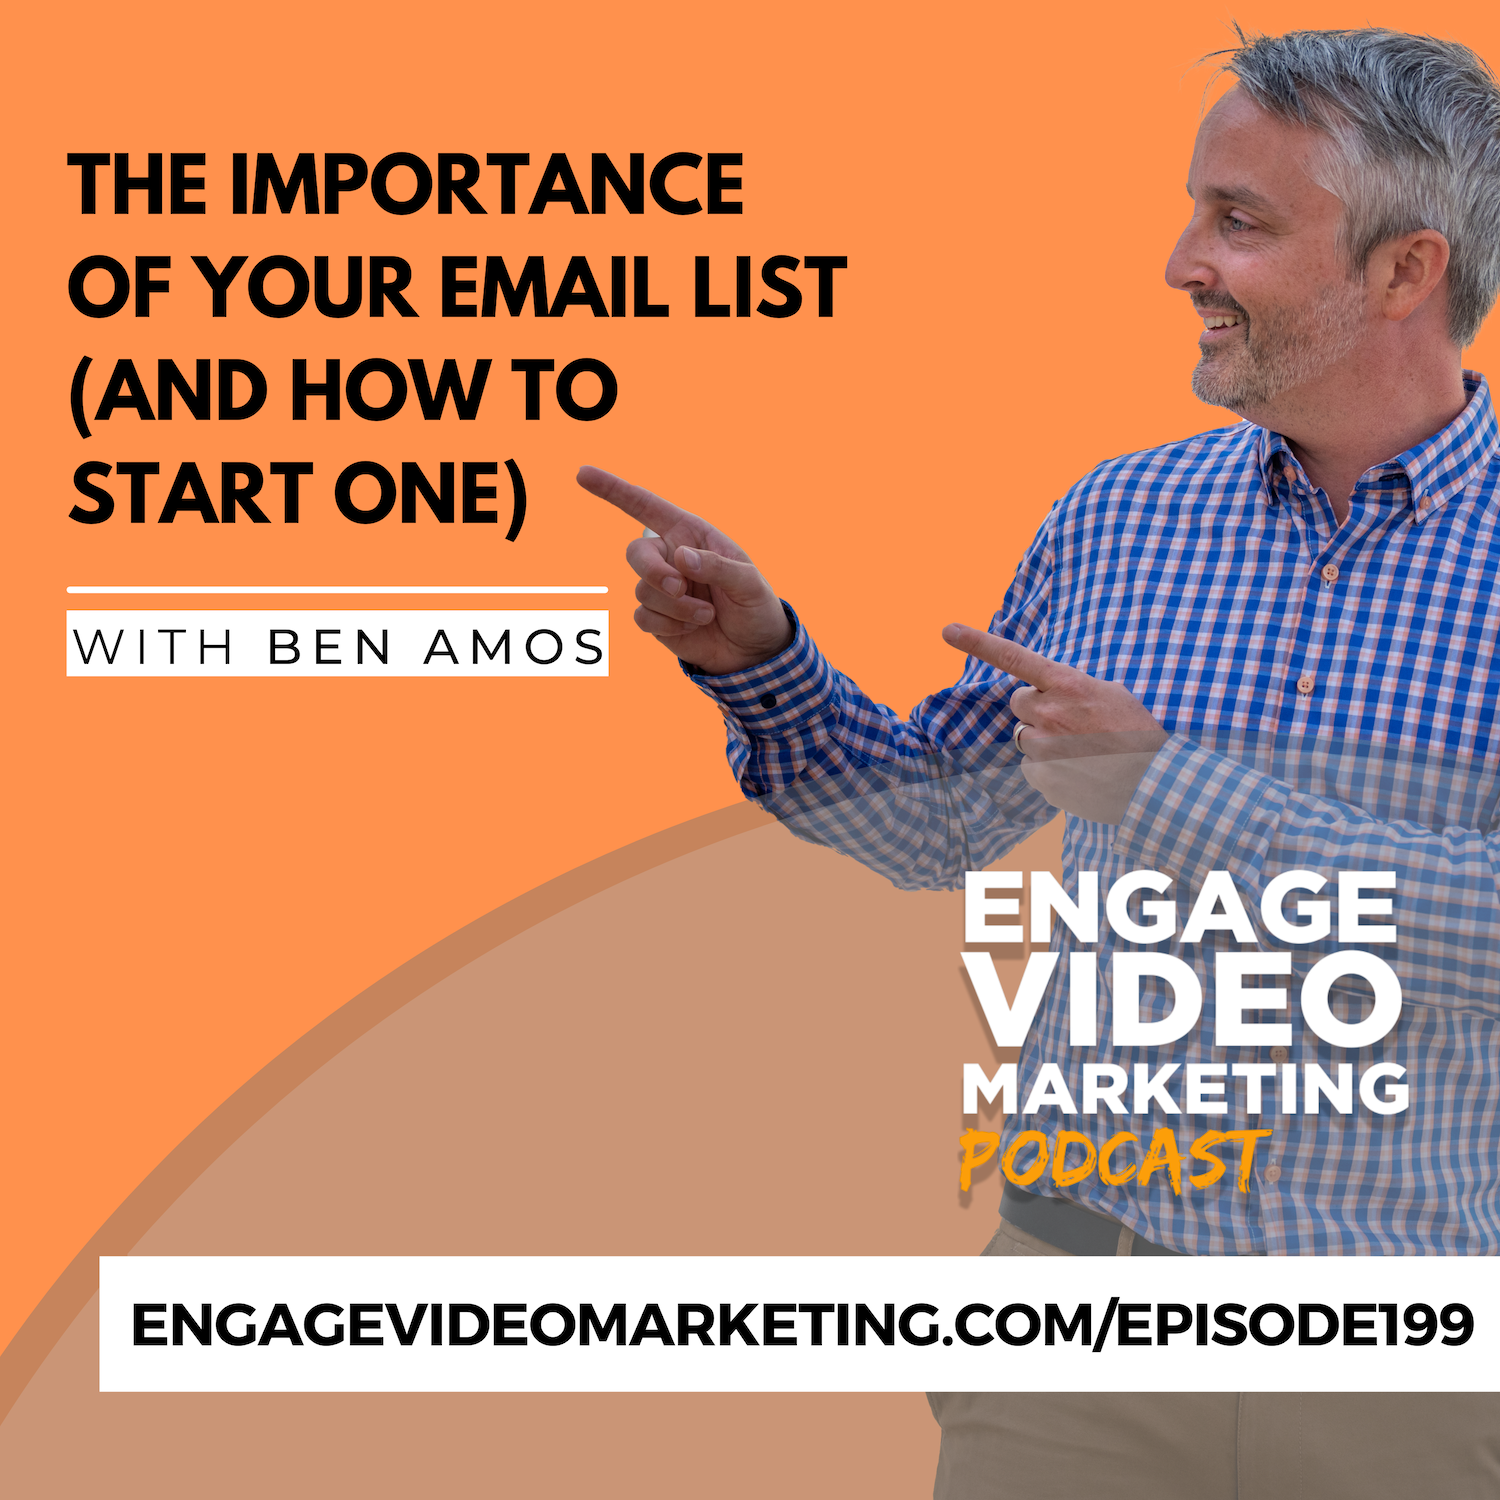 The Importance of Your Email List (and how to start one)